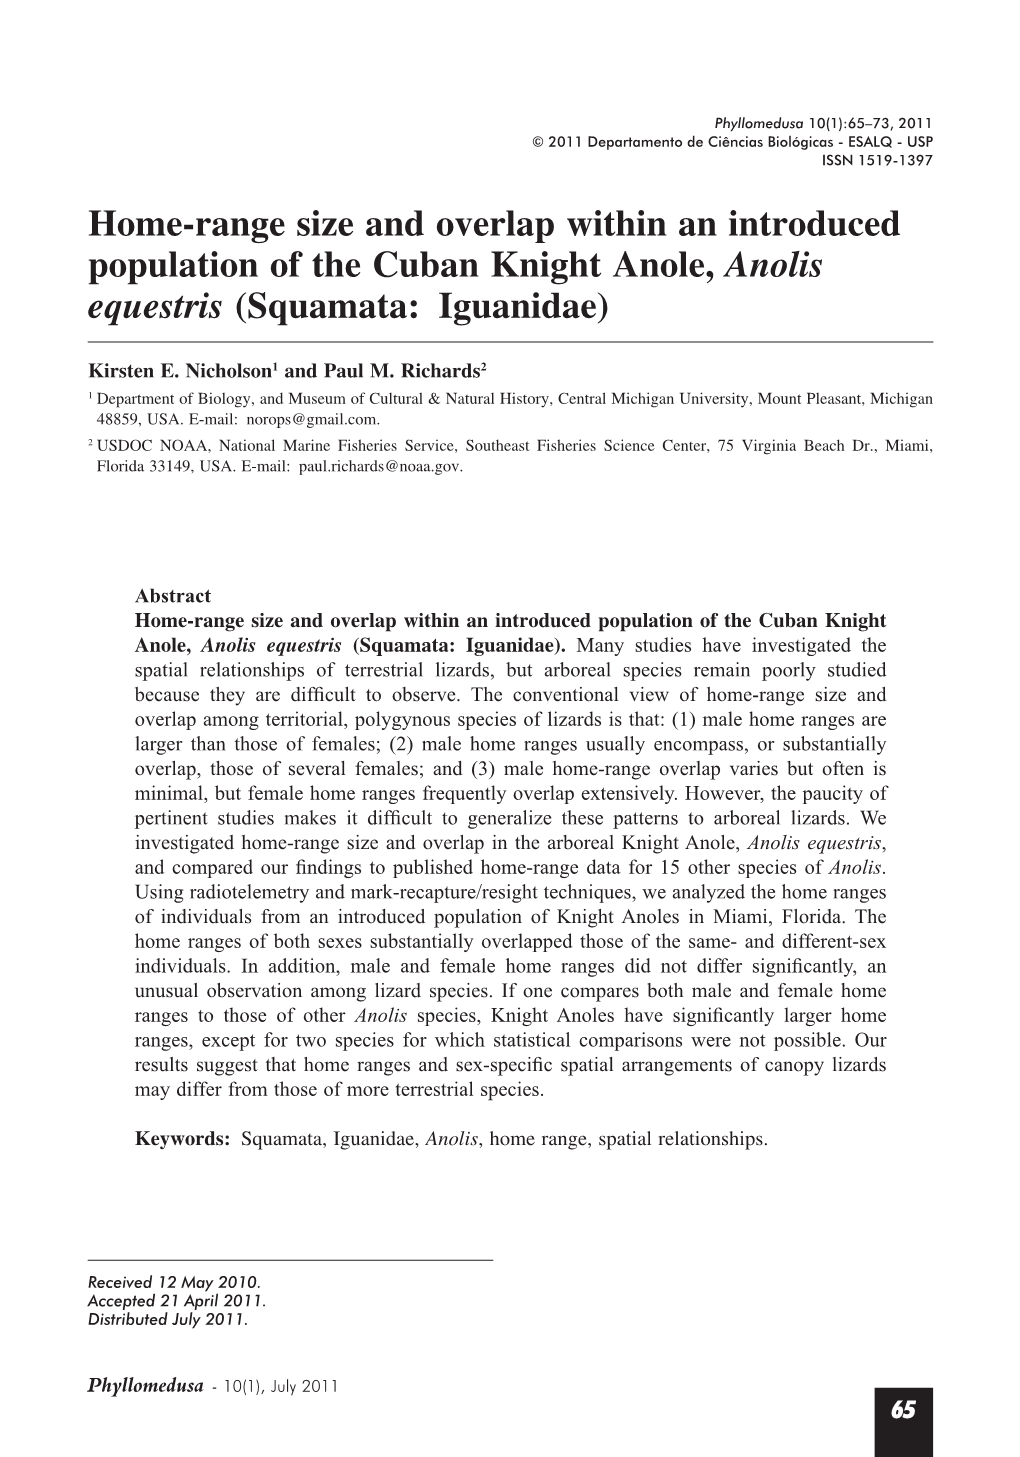 Home-Range Size and Overlap Within an Introduced Population of the Cuban Knight Anole, Anolis Equestris (Squamata: Iguanidae)